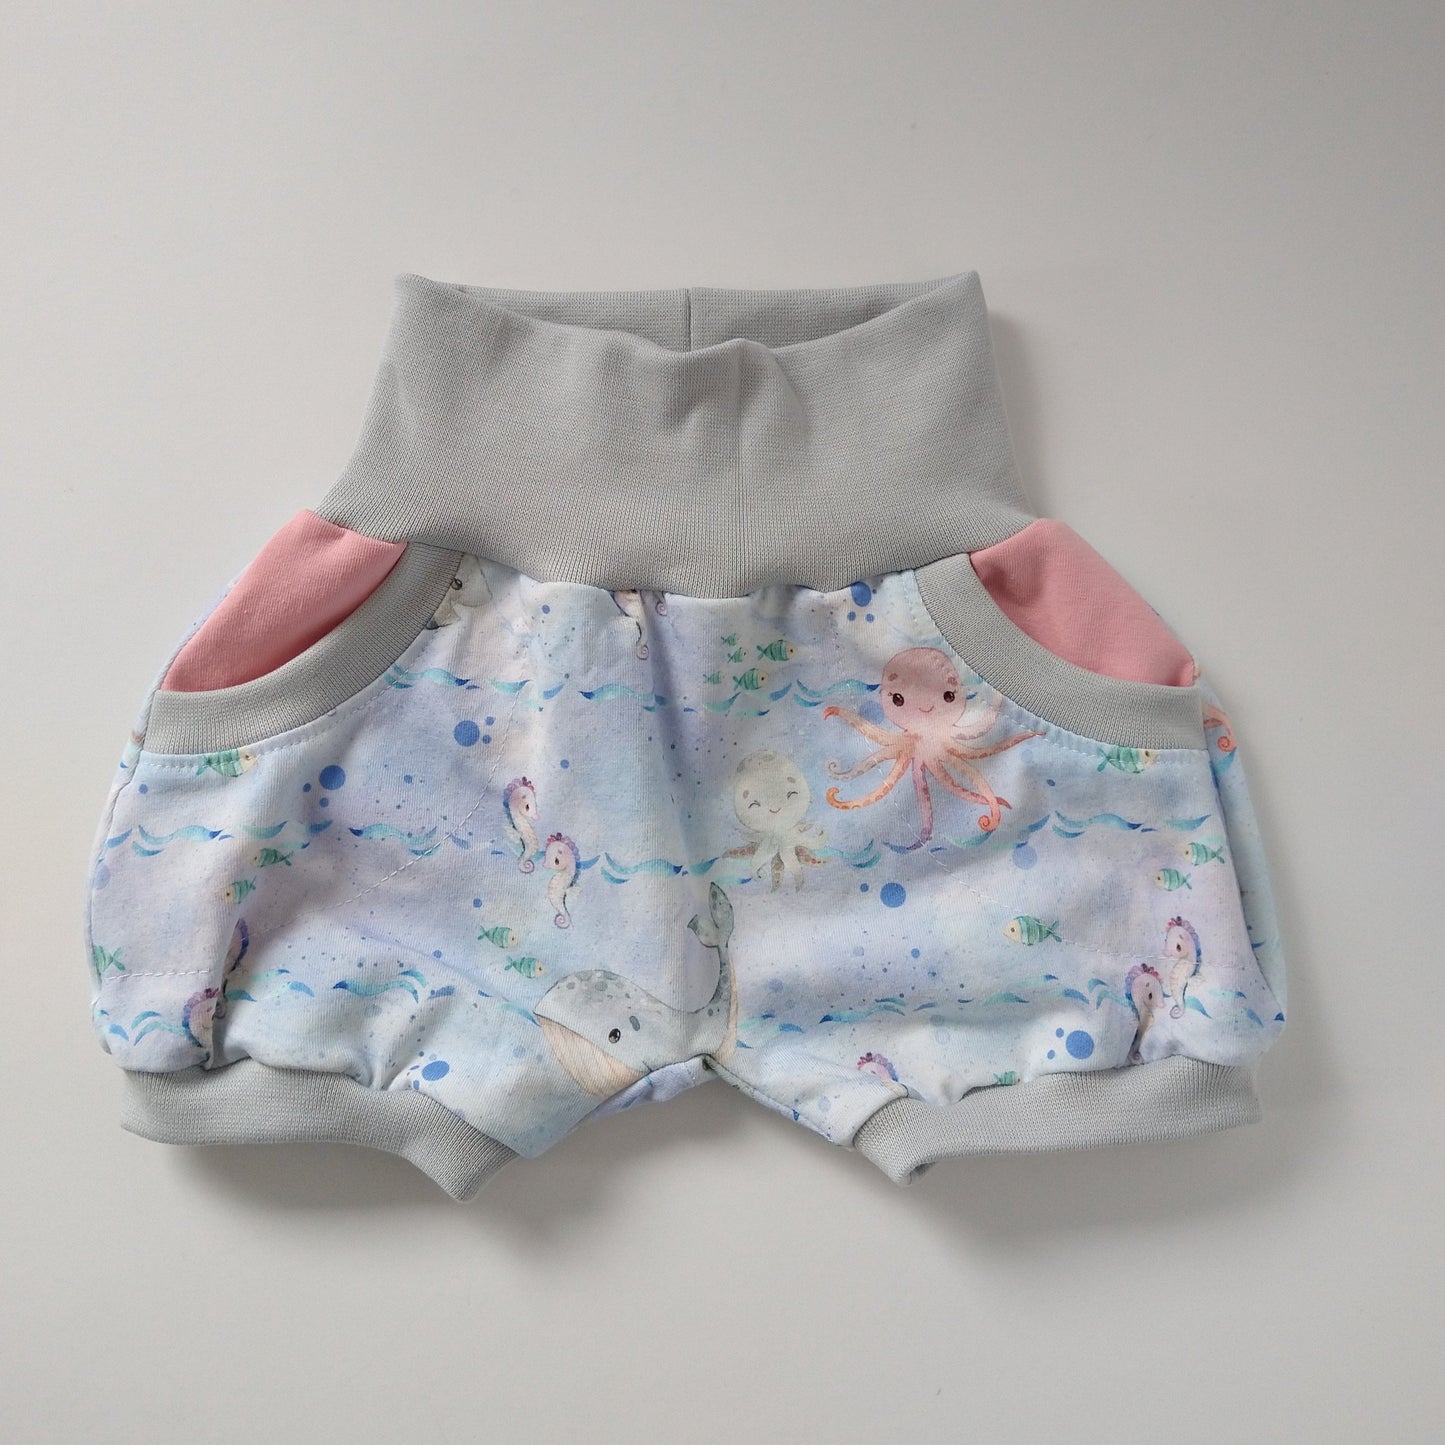 Baby summer shorts, size EUR 68 cm / US 4-6 months, ocean life mix and match (Handmade in Canada)